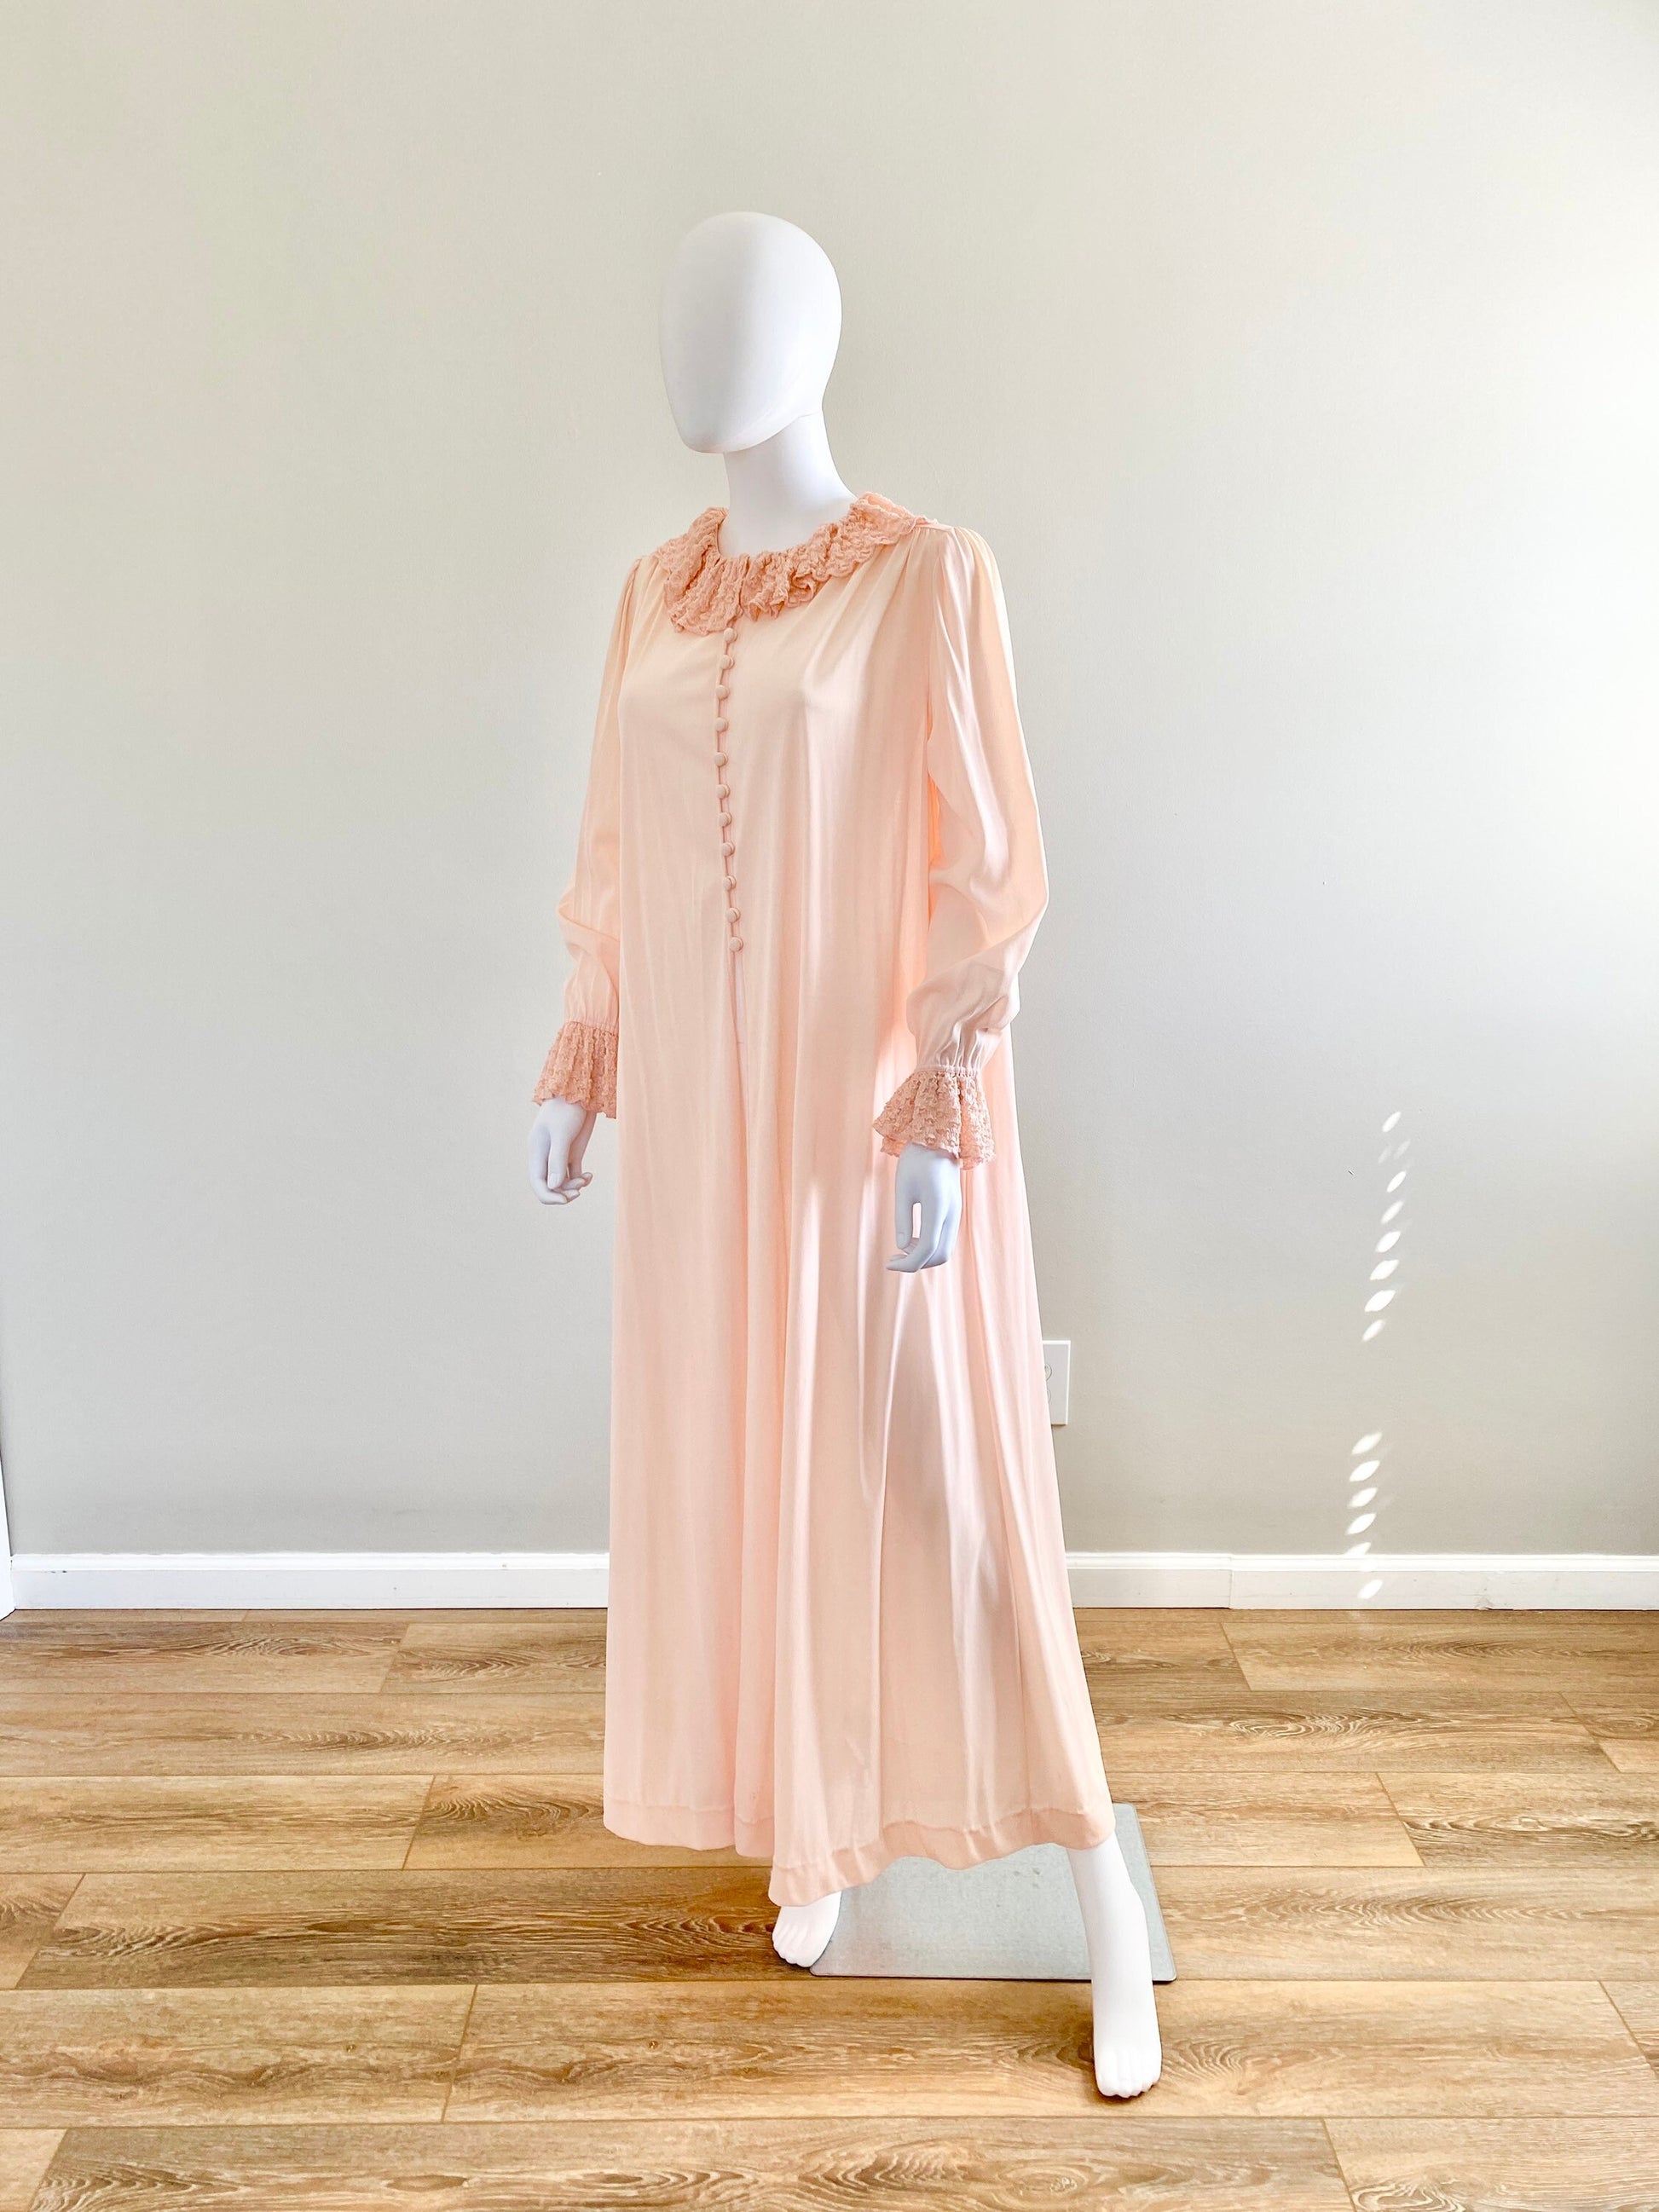 Vintage 1960s Pink Dressing Gown with Ruffled Collar / 60s retro robe / Size M L